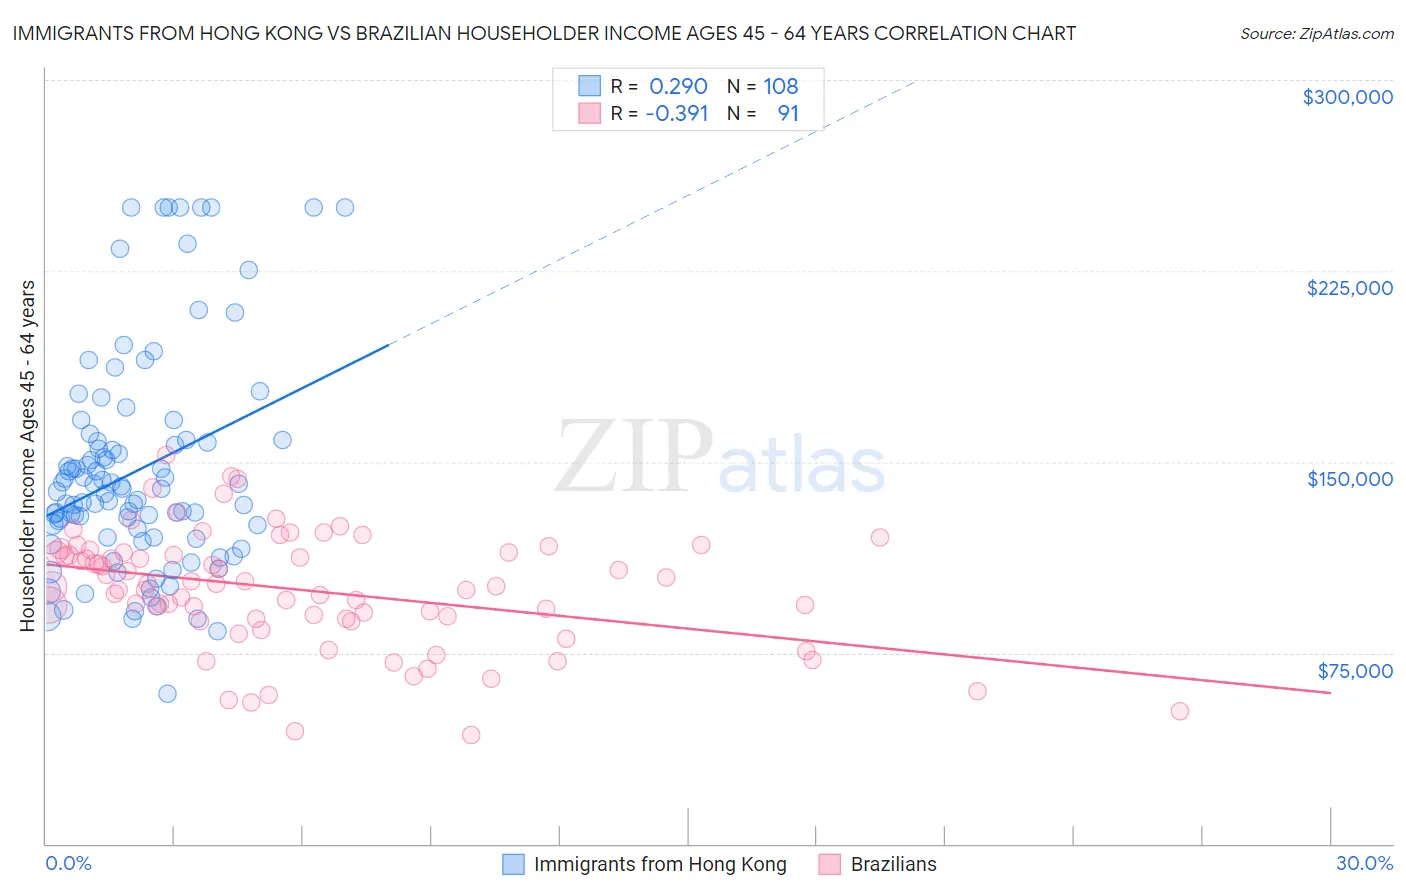 Immigrants from Hong Kong vs Brazilian Householder Income Ages 45 - 64 years